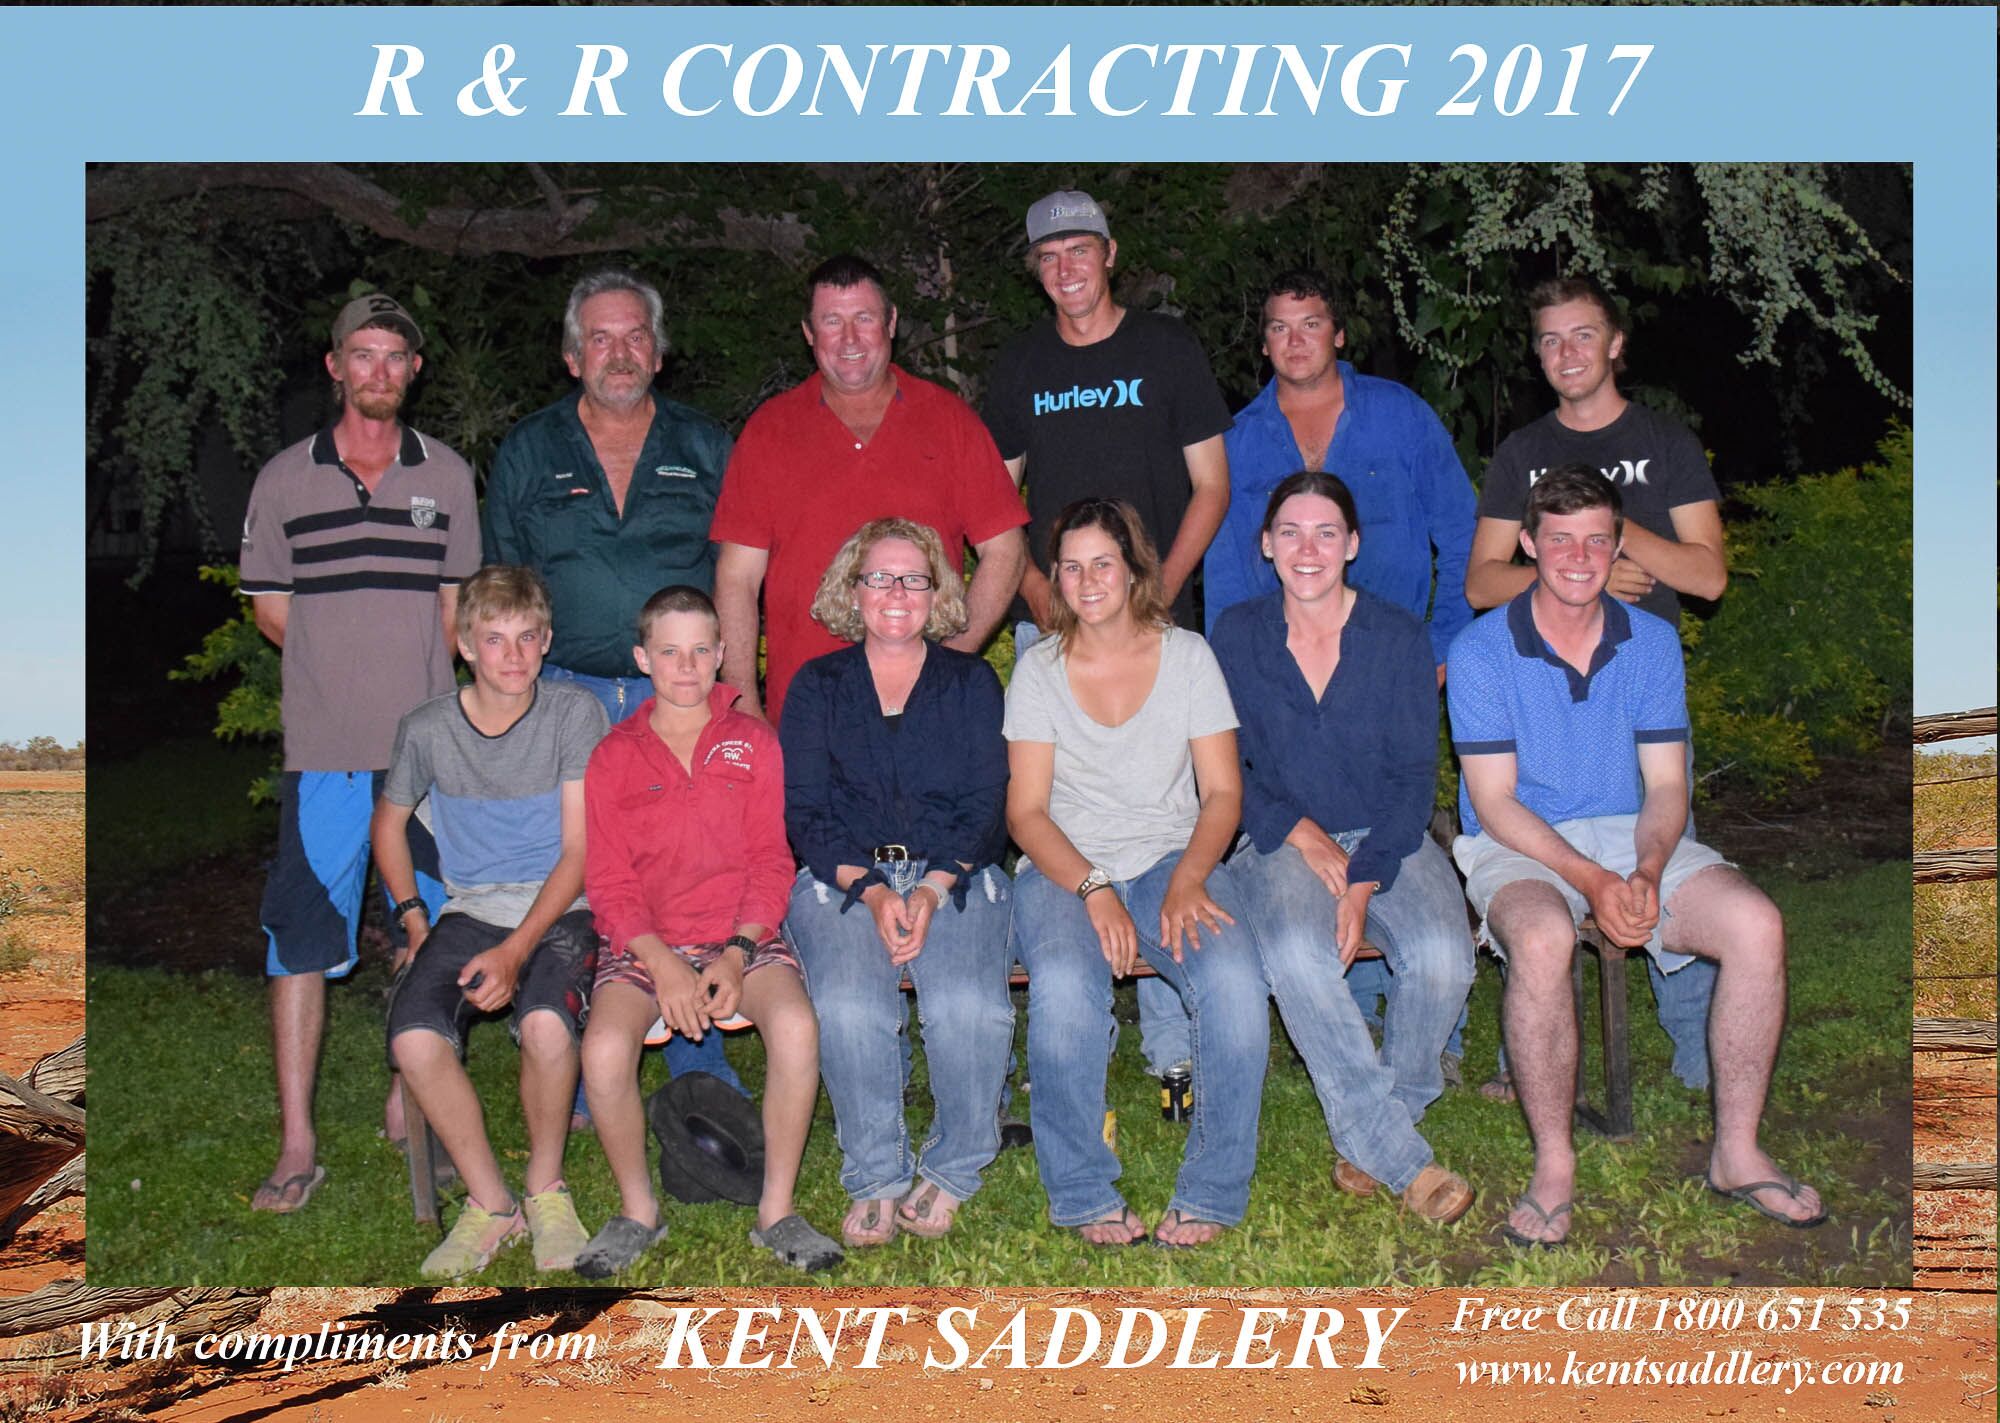 Drovers & Contractors - R&R Contracting 2